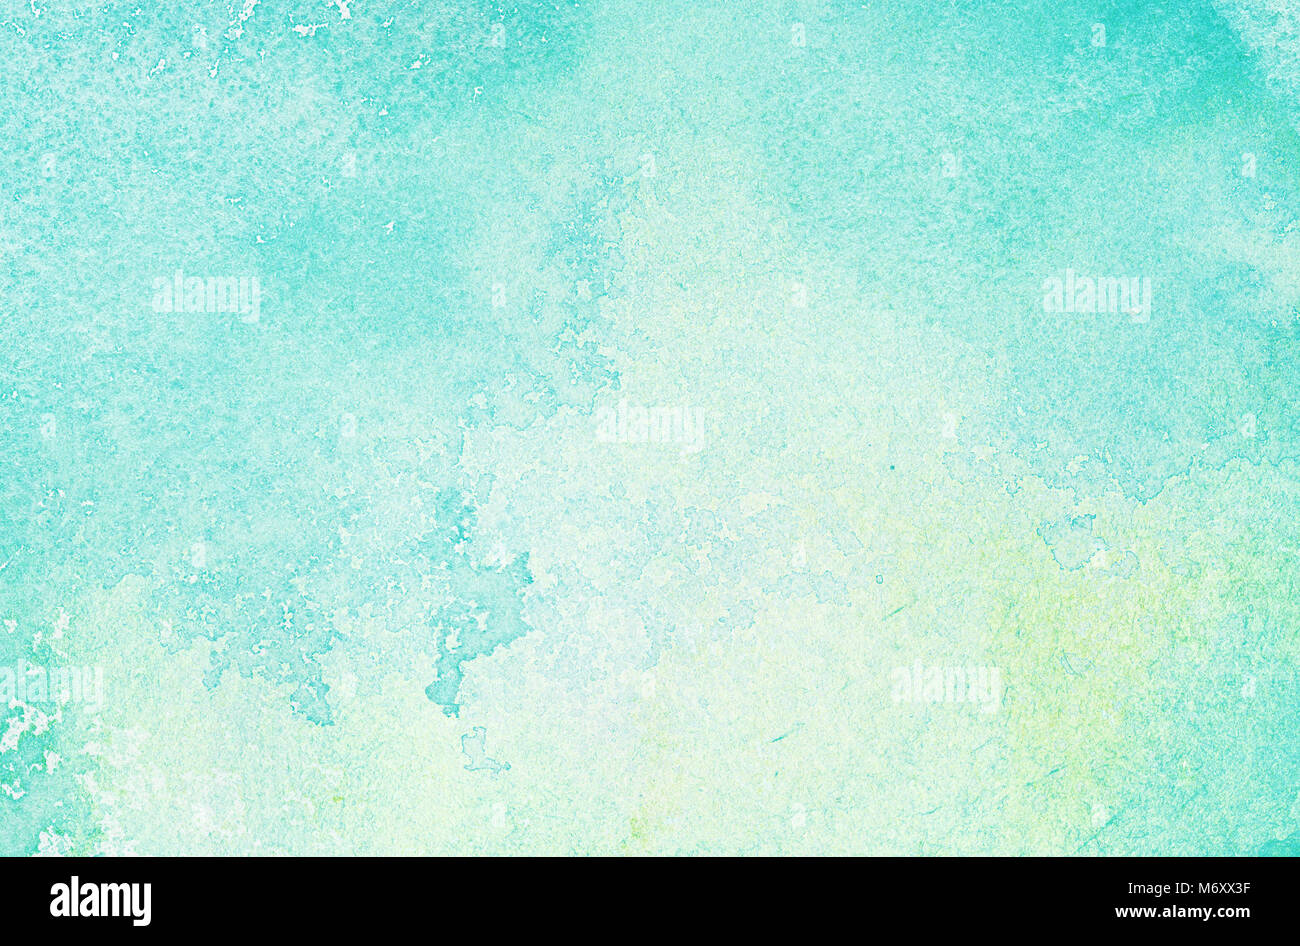 Abstract light blue watercolor background, painted on watercolor paper Stock Photo